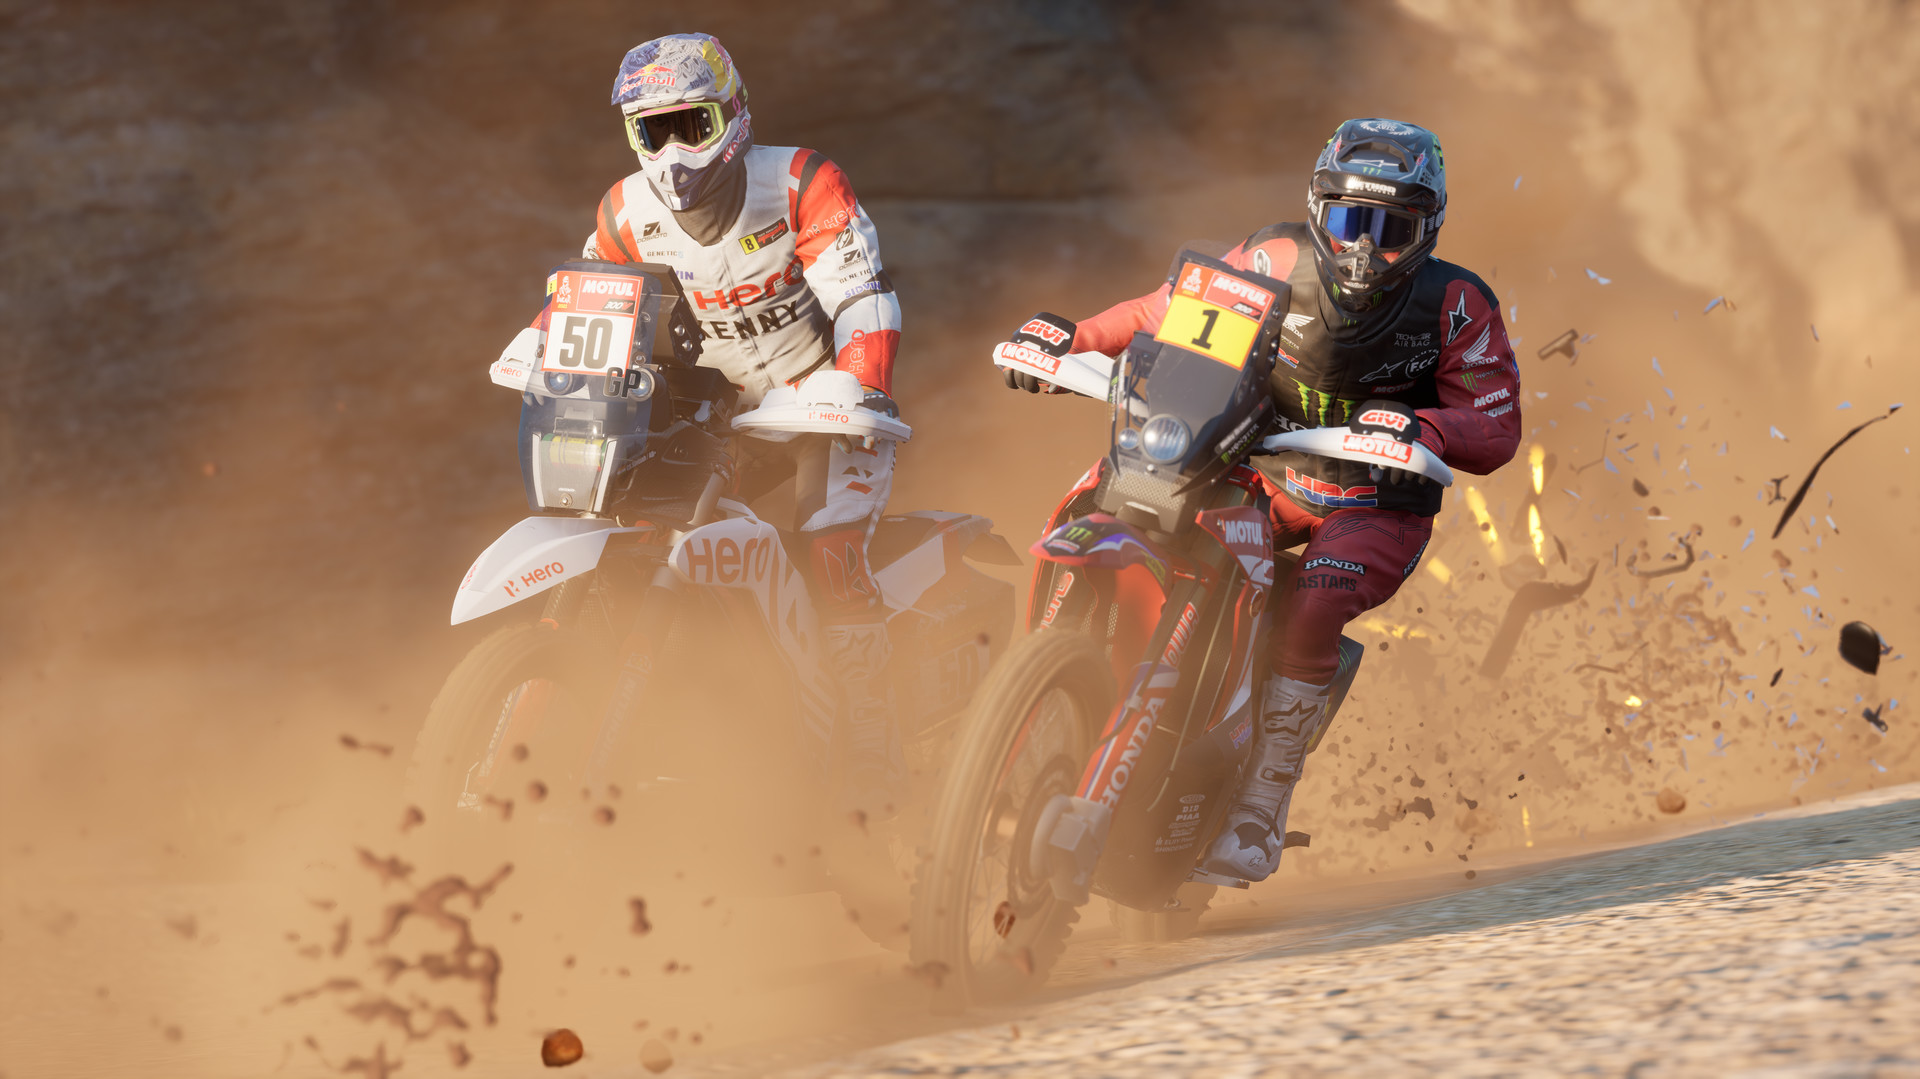 DAKAR Desert Rally is now available for free on PC